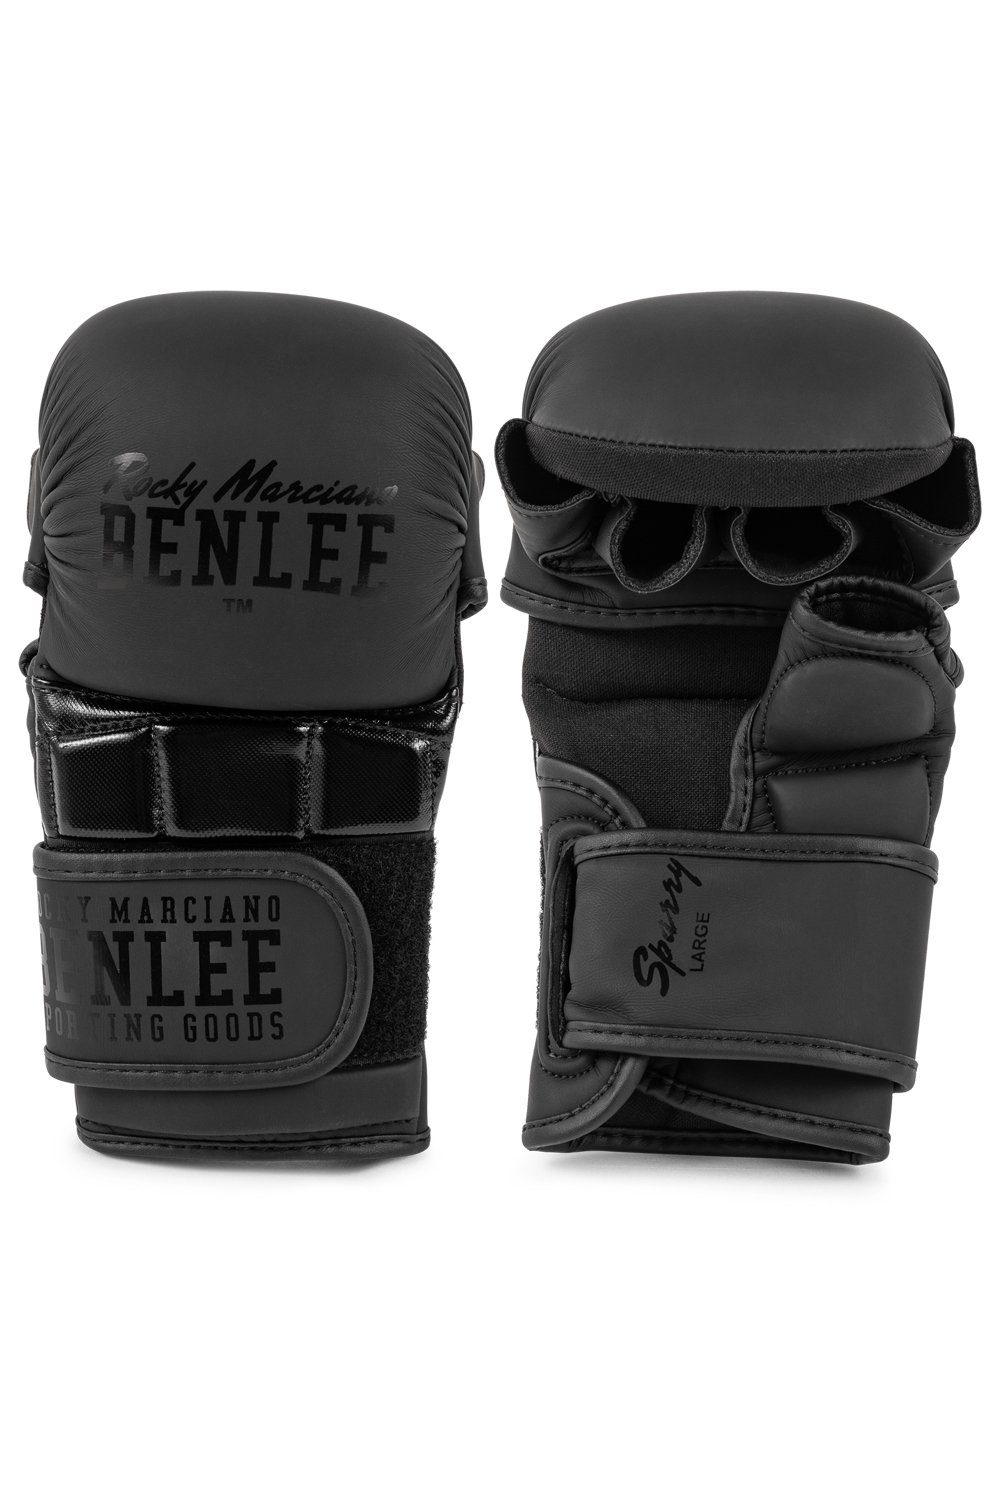 Benlee Rocky Marciano Boxhandschuhe SPARRY